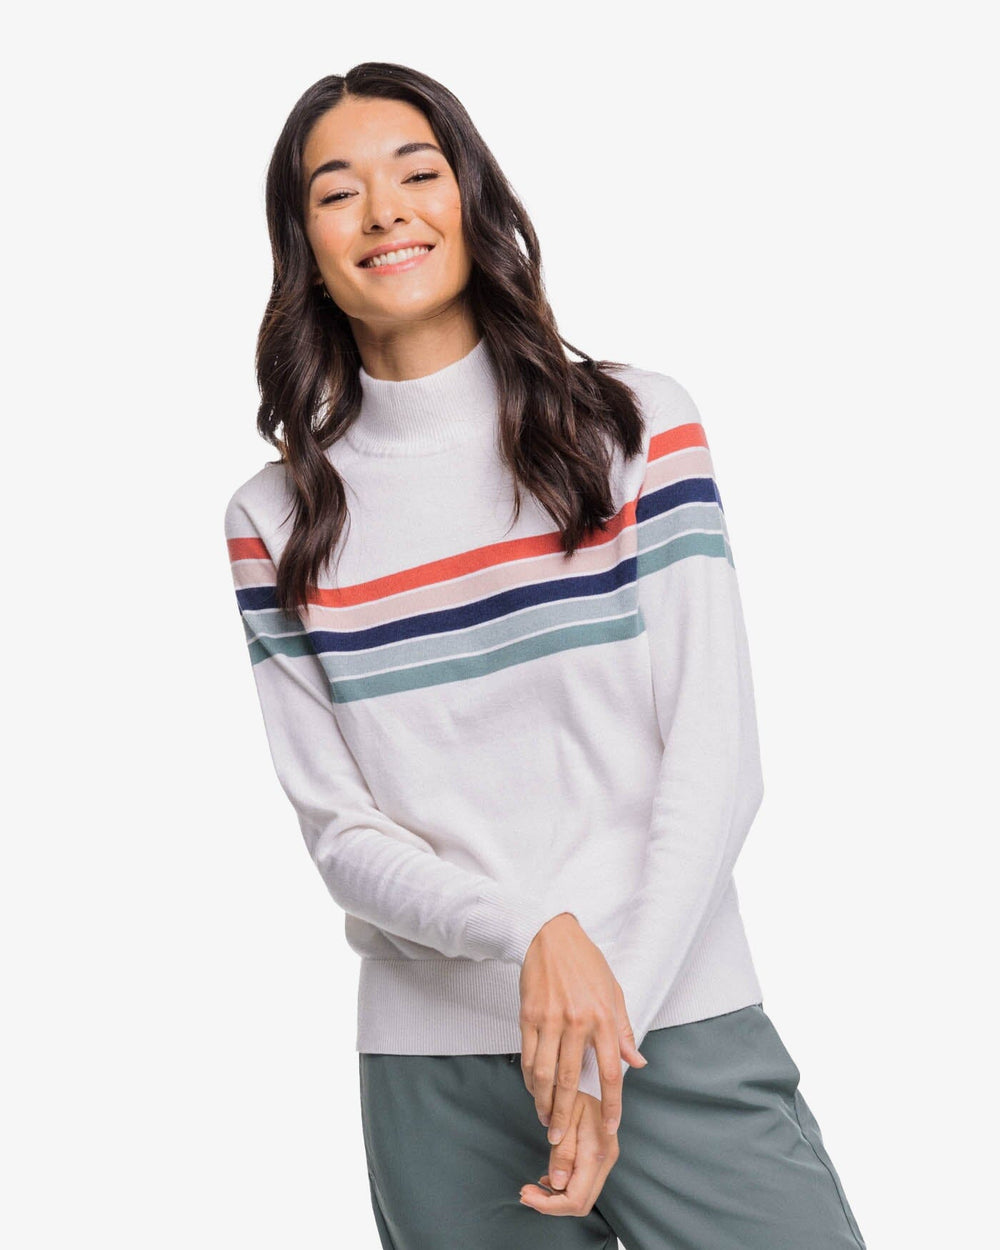 The front view of the Southern Tide Brynlee Sweater by Southern Tide - Classic White